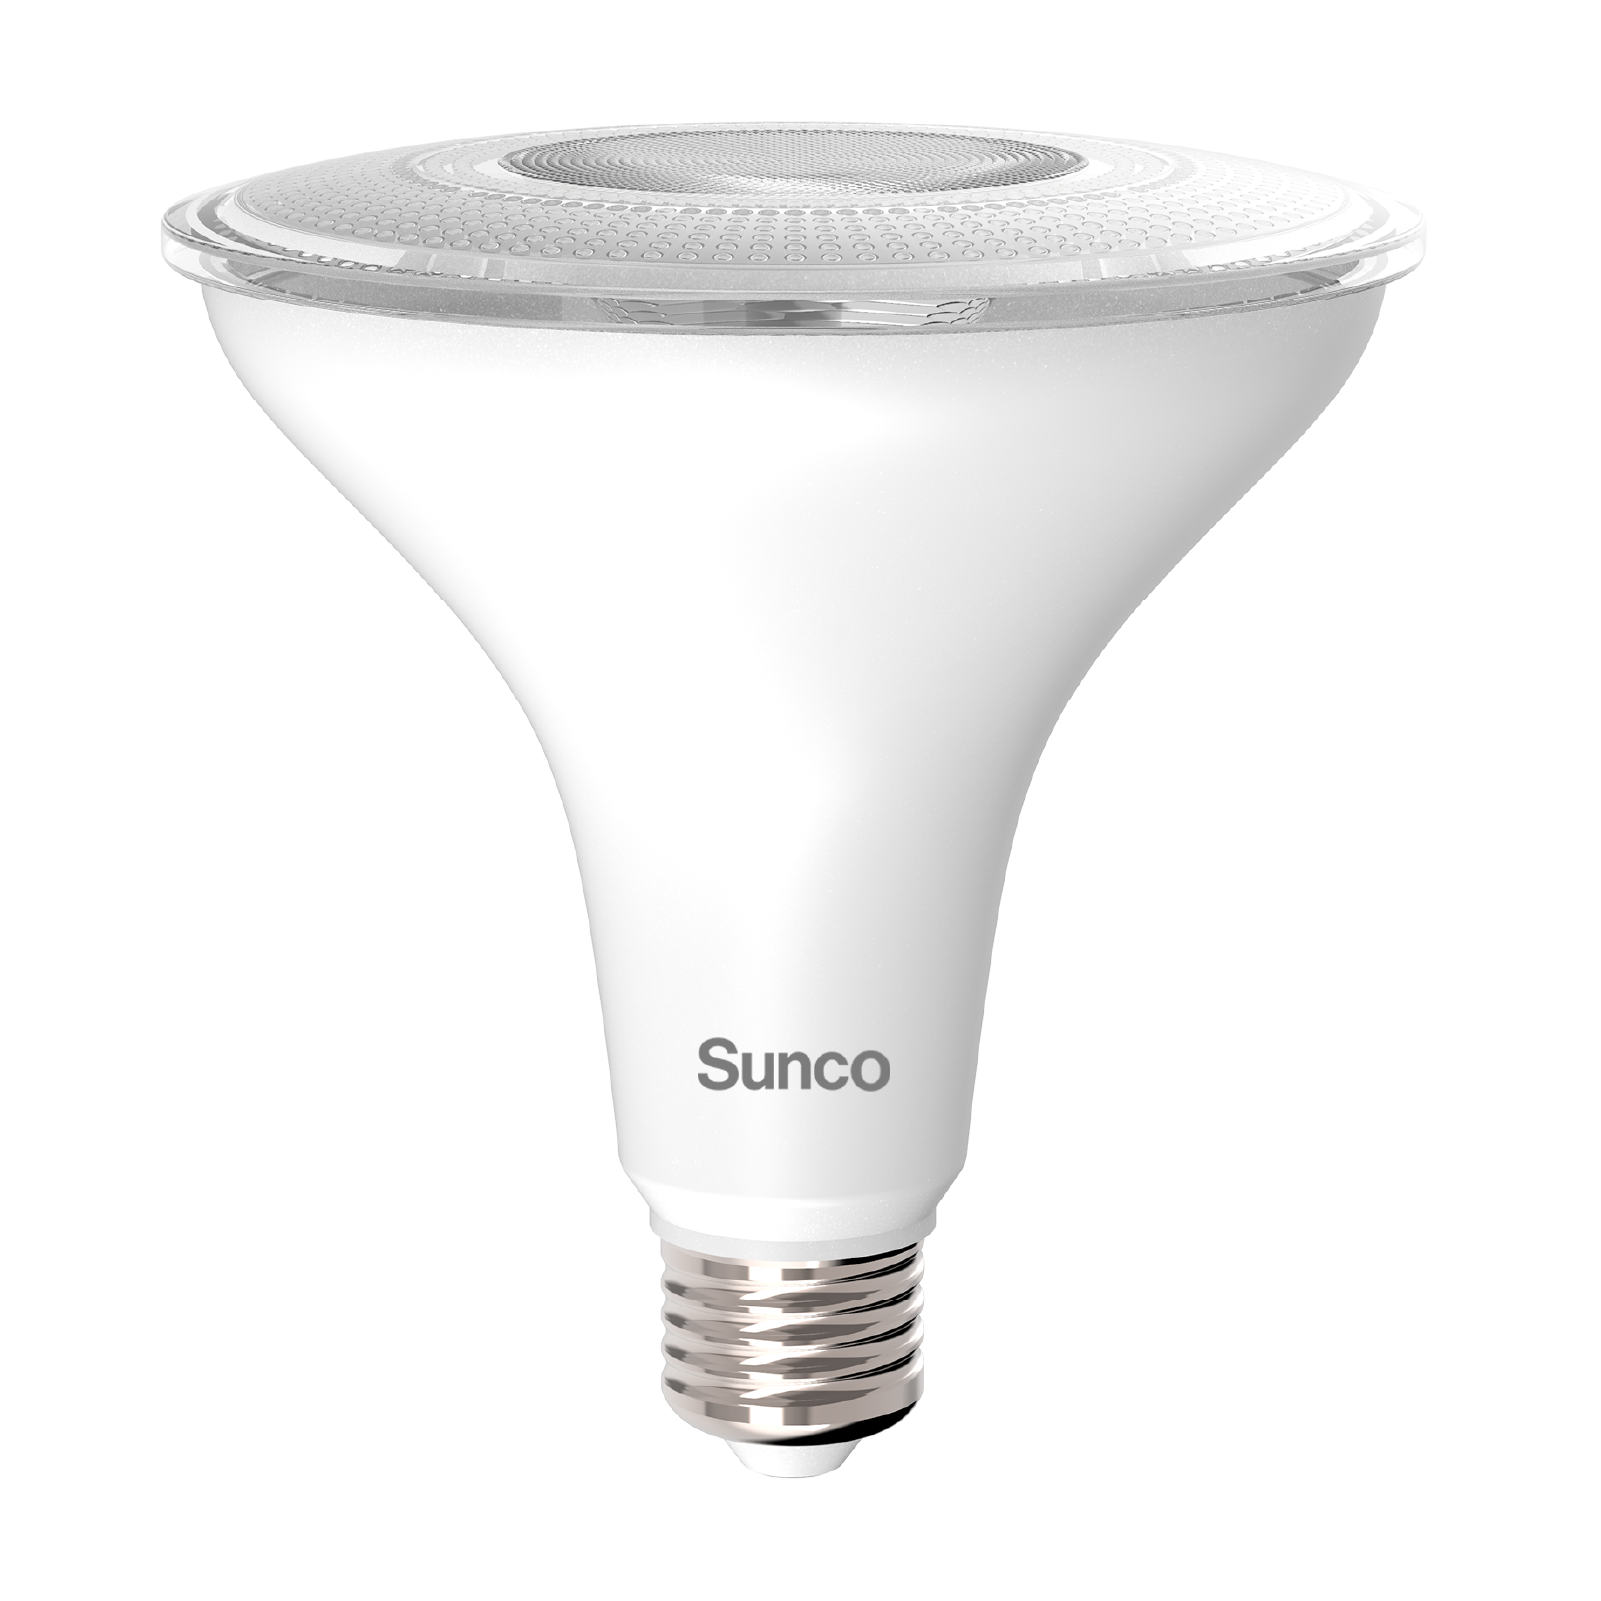 Sunco PAR38 LED Bulb Dusk to Dawn is wet rated for outdoor use and includes an E26 base. The Dusk to Dawn sensor automatically turns on the light bulb when no light is detected and turns light off at sunrise. A wet rated, 15W LED that is equivalent to a 120W light bulb. The narrow 40-degree bulb works well as a spotlight in landscape lighting to highlight sculpture or greenery or architectural details. With auto on/off functionality, you do not need a timer; it works without an app, too. 